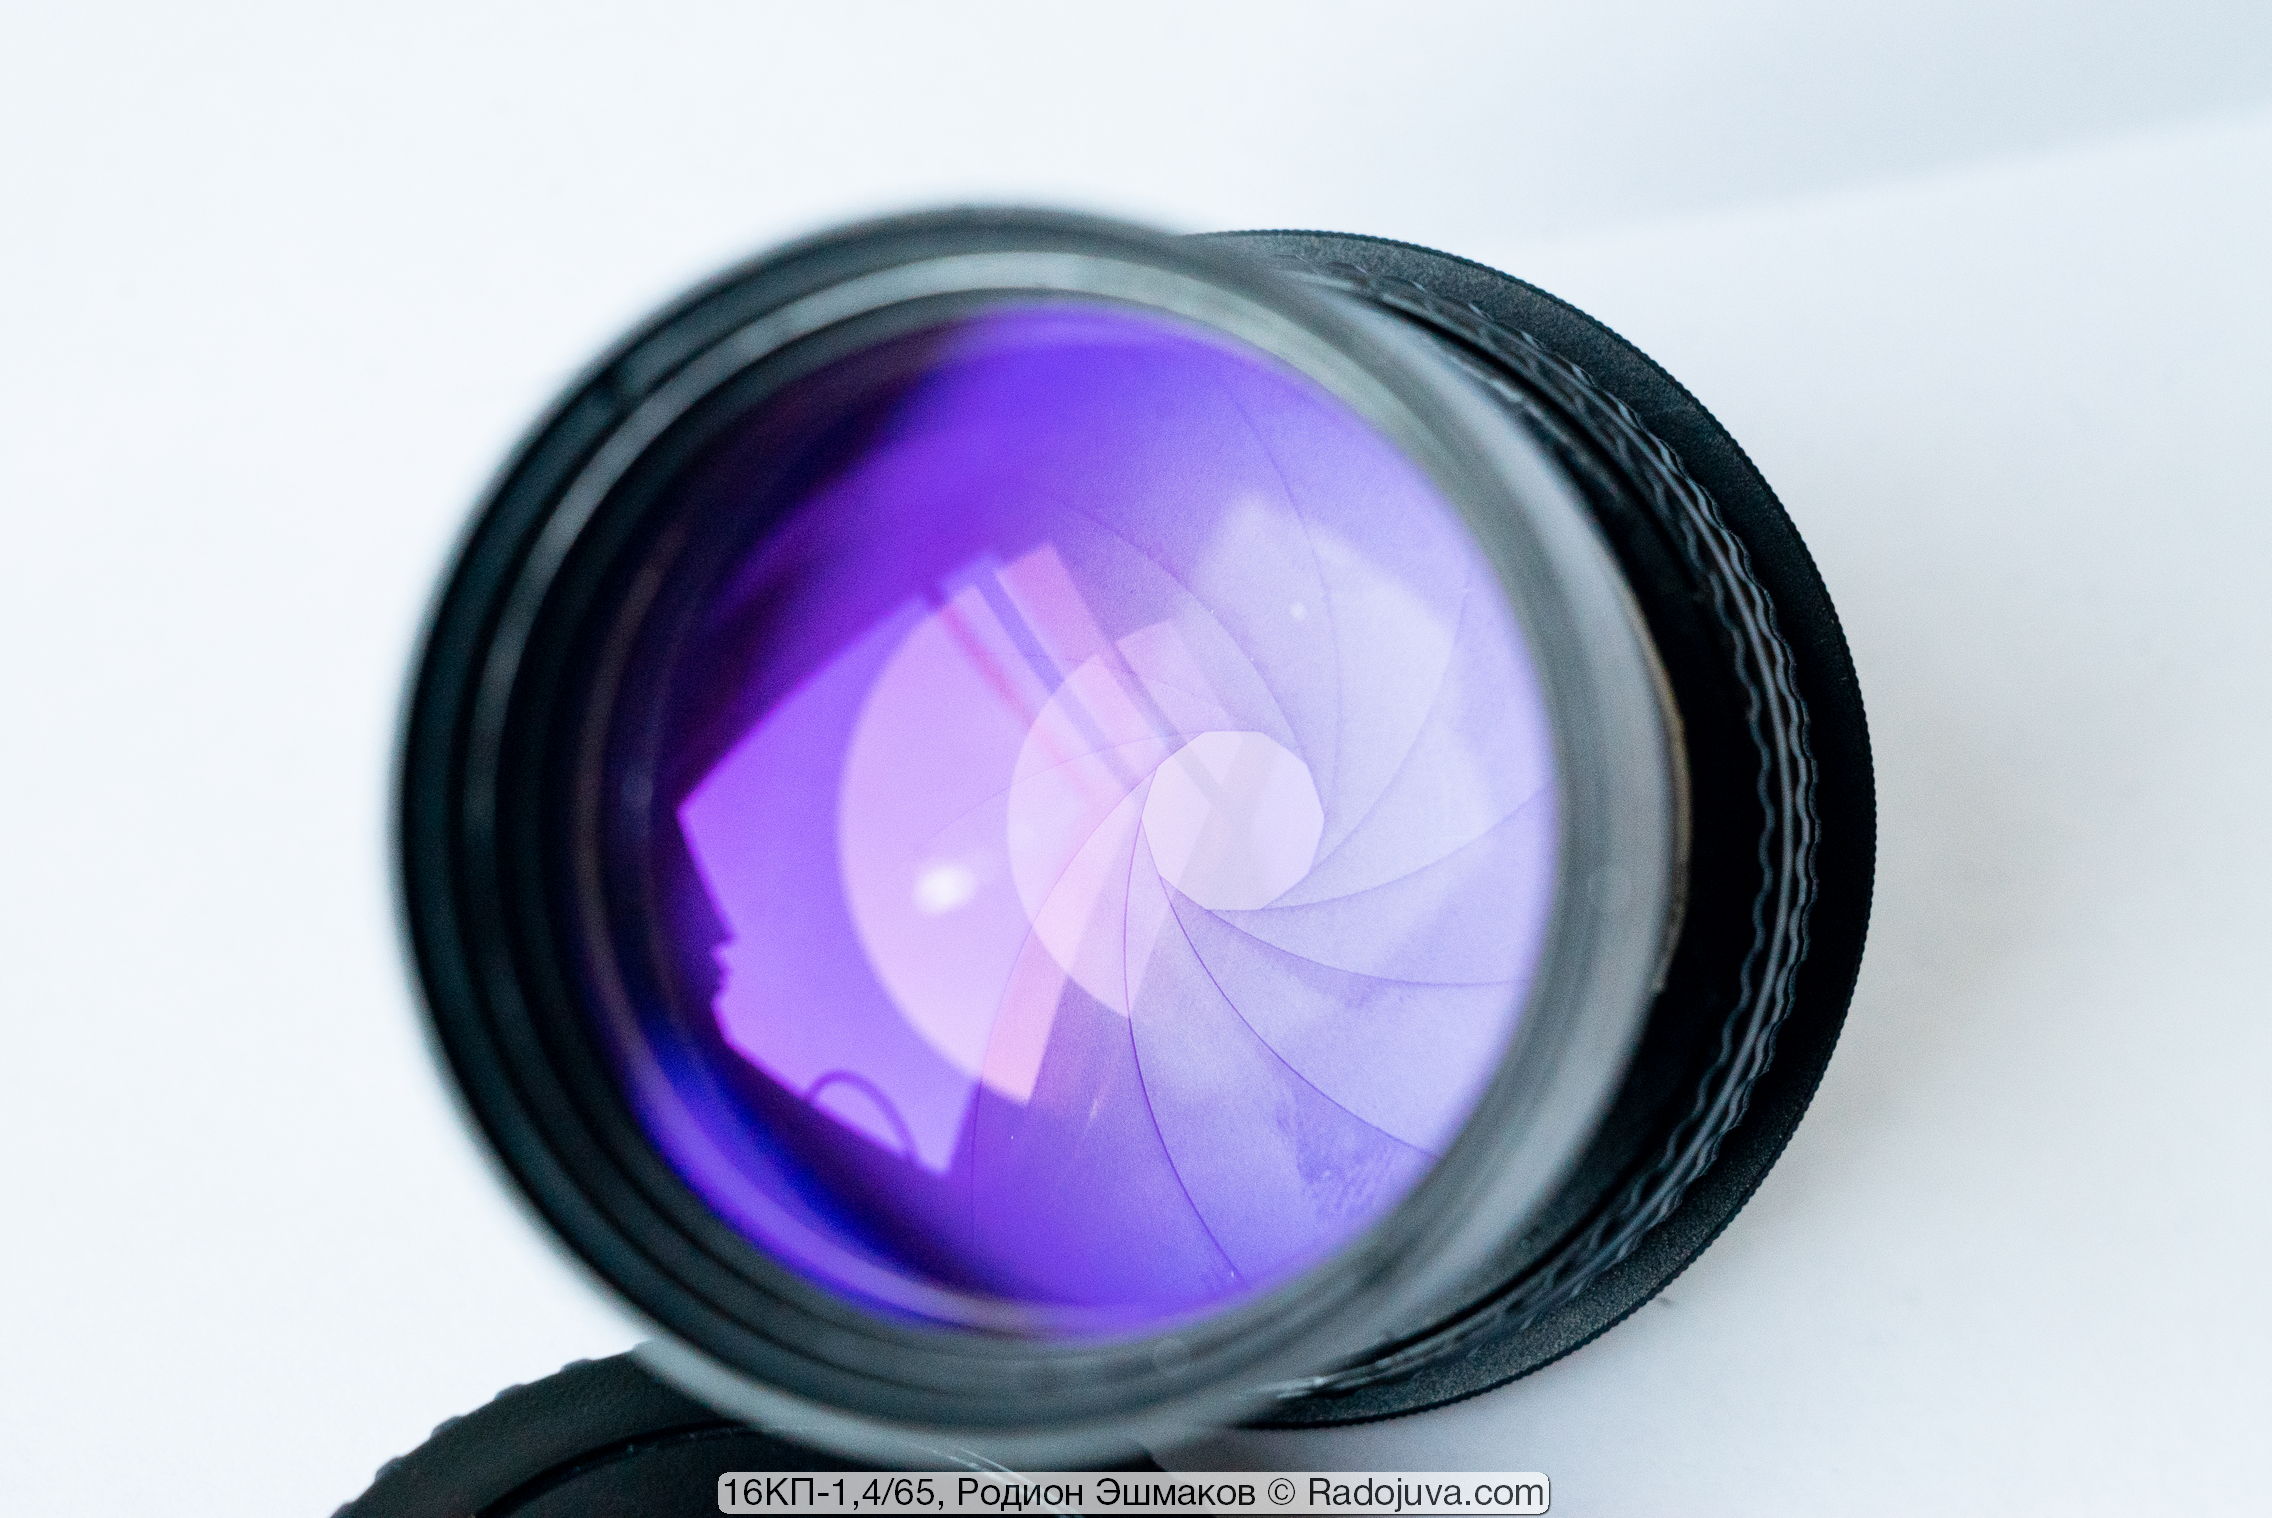 Round iris diaphragm installed in the lens during adaptation.